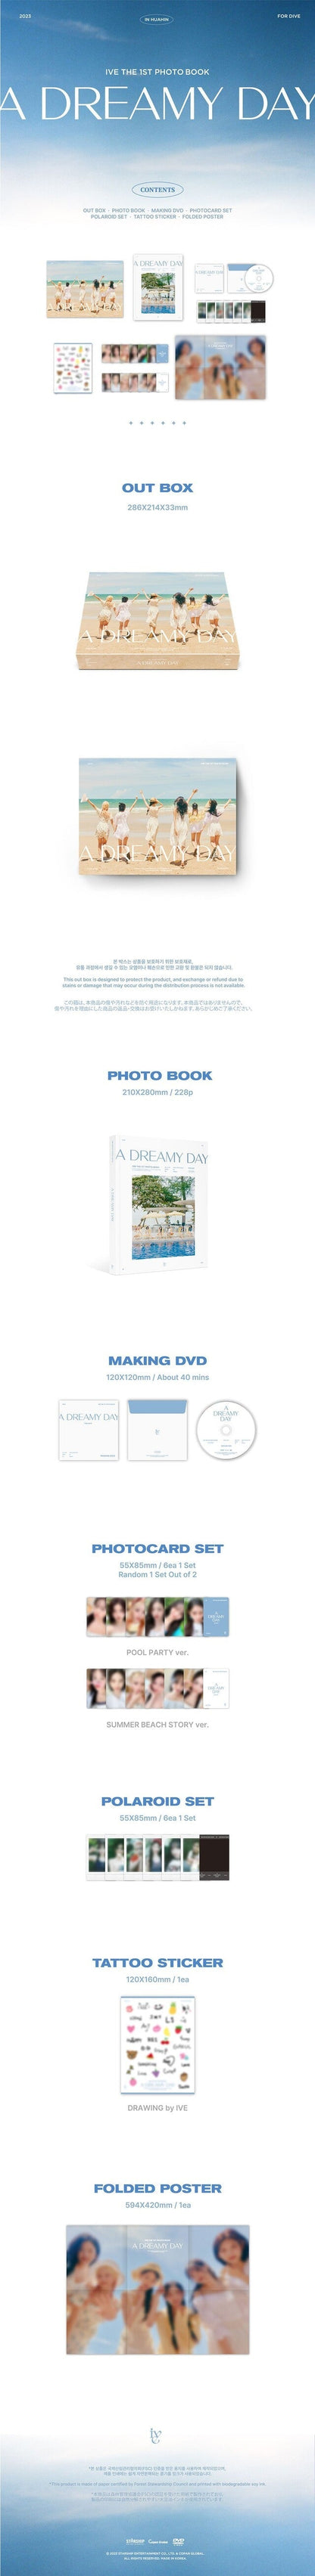 [PREORDER] STARSHIP IVE - THE 1ST PHOTOBOOK A DREAMY DAY